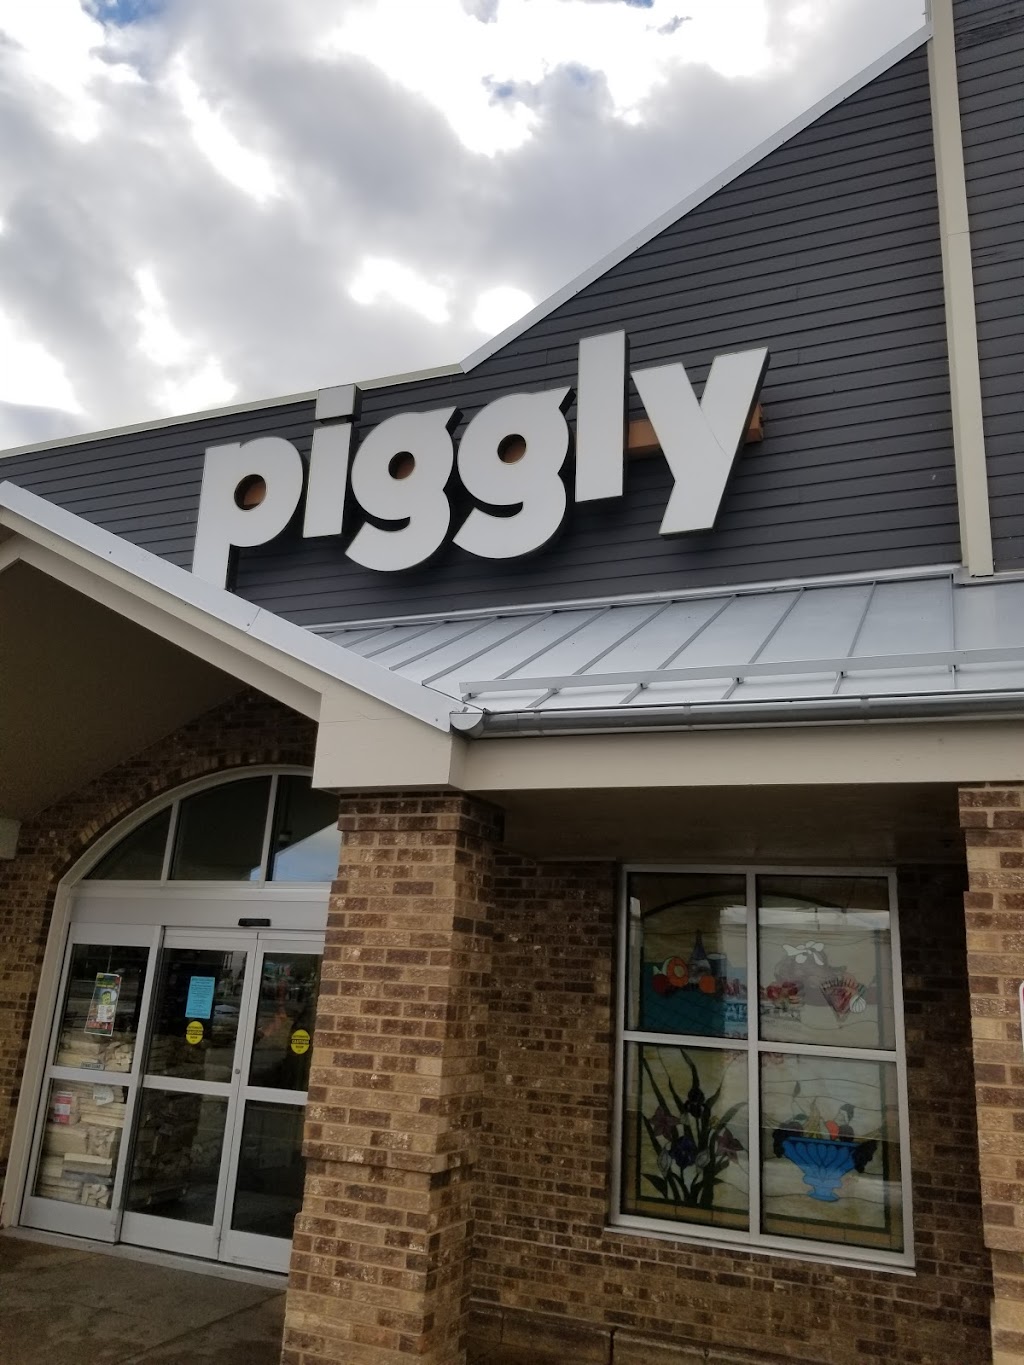 Piggly Wiggly | 6111 W Mequon Rd, Mequon, WI 53092, USA | Phone: (262) 242-2180